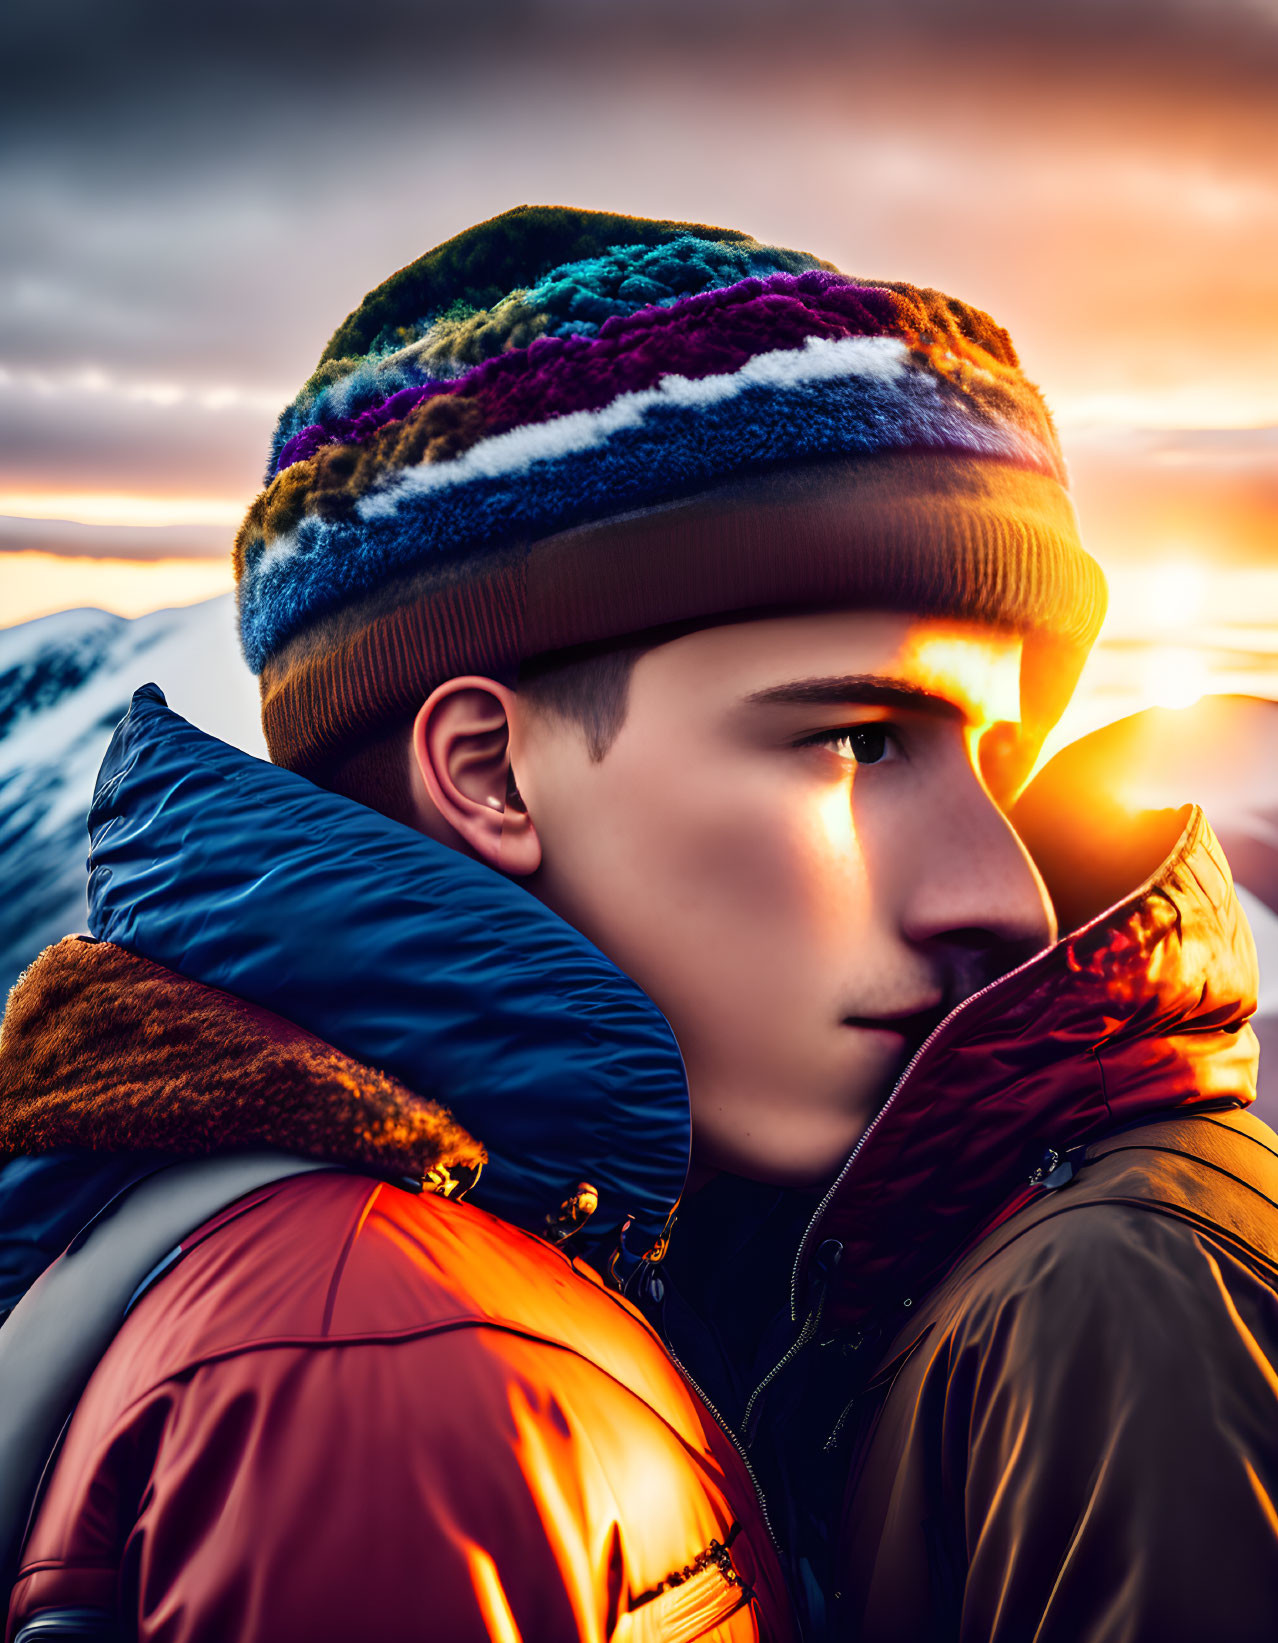 Person in Colorful Knit Cap & Winter Jacket at Sunset